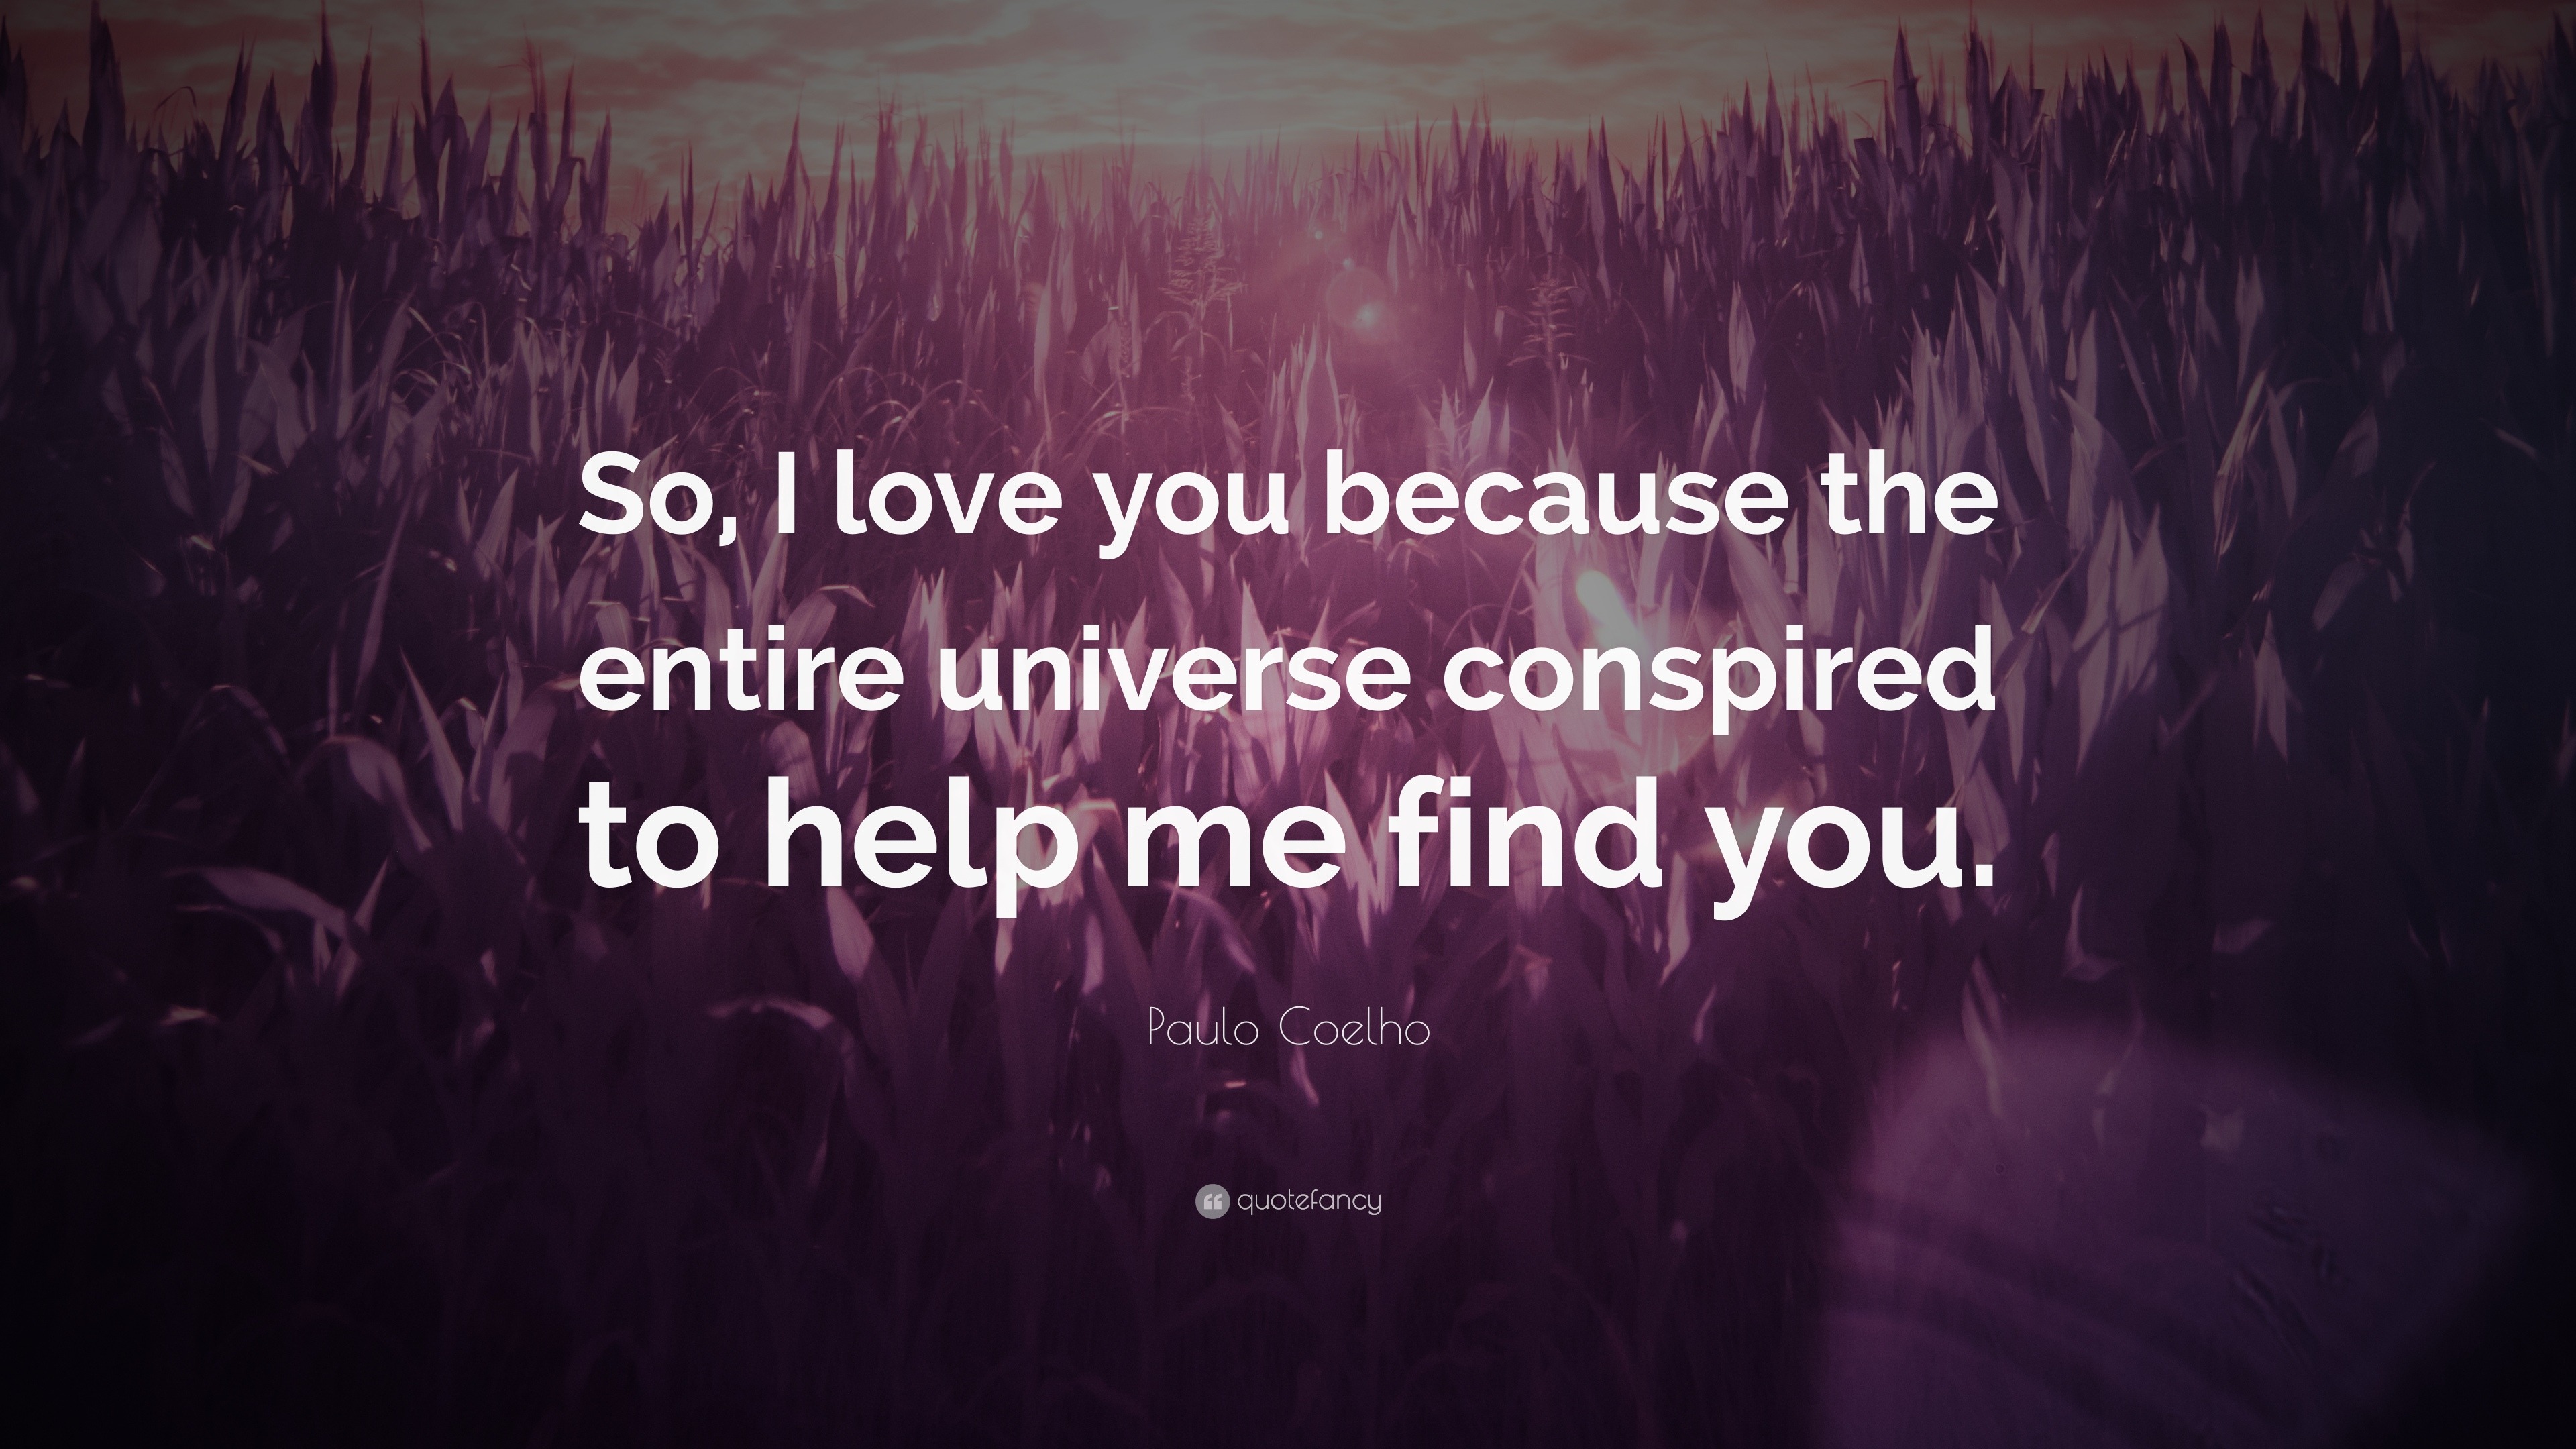 Paulo Coelho Quote So I Love You Because The Entire Universe Conspired To